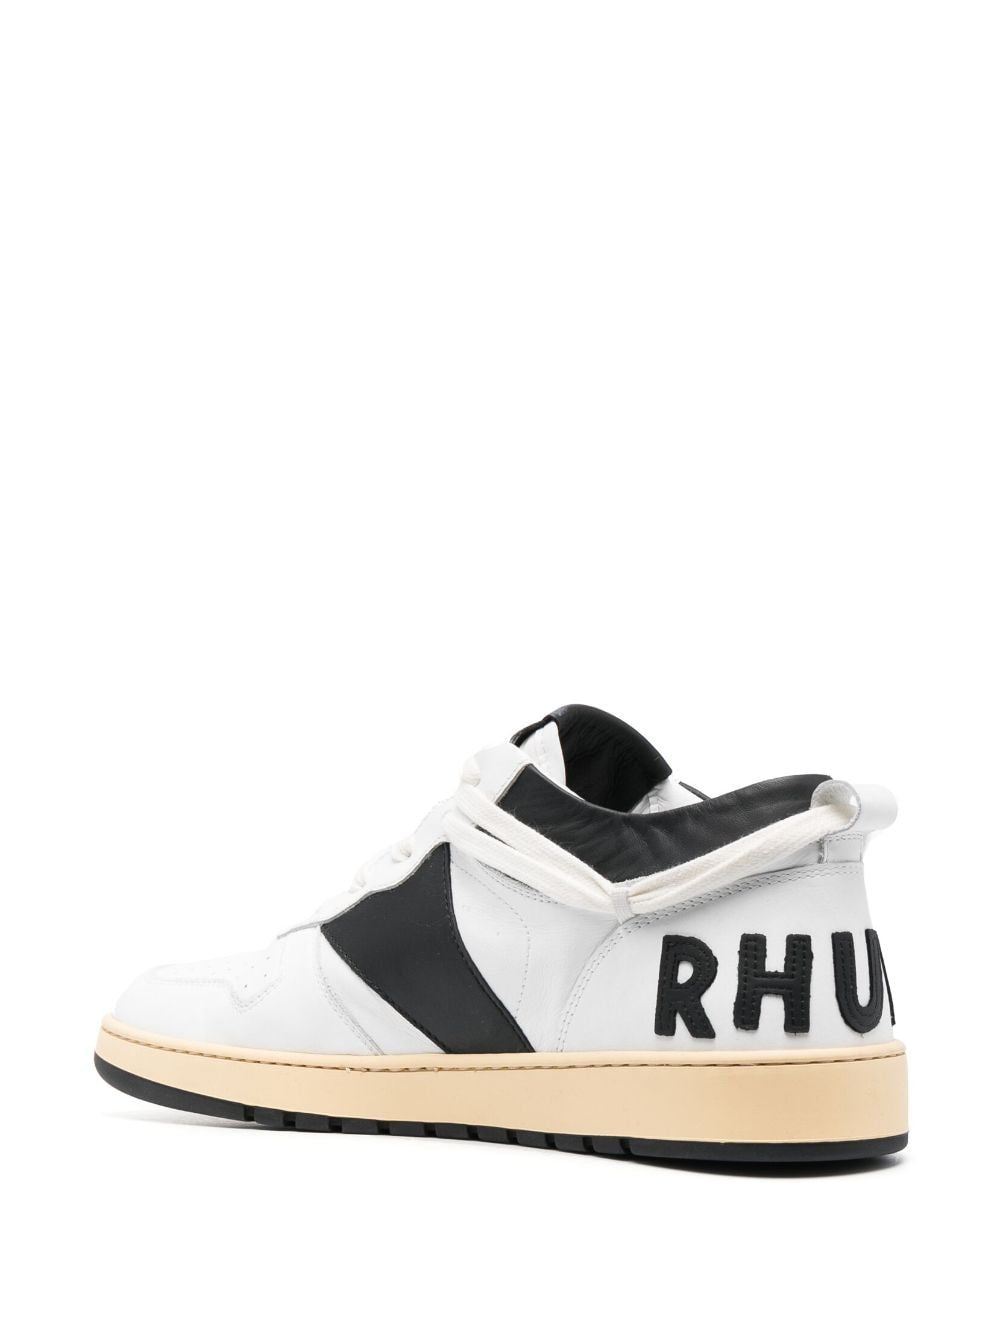 Men's White Leather Panelled Sneakers